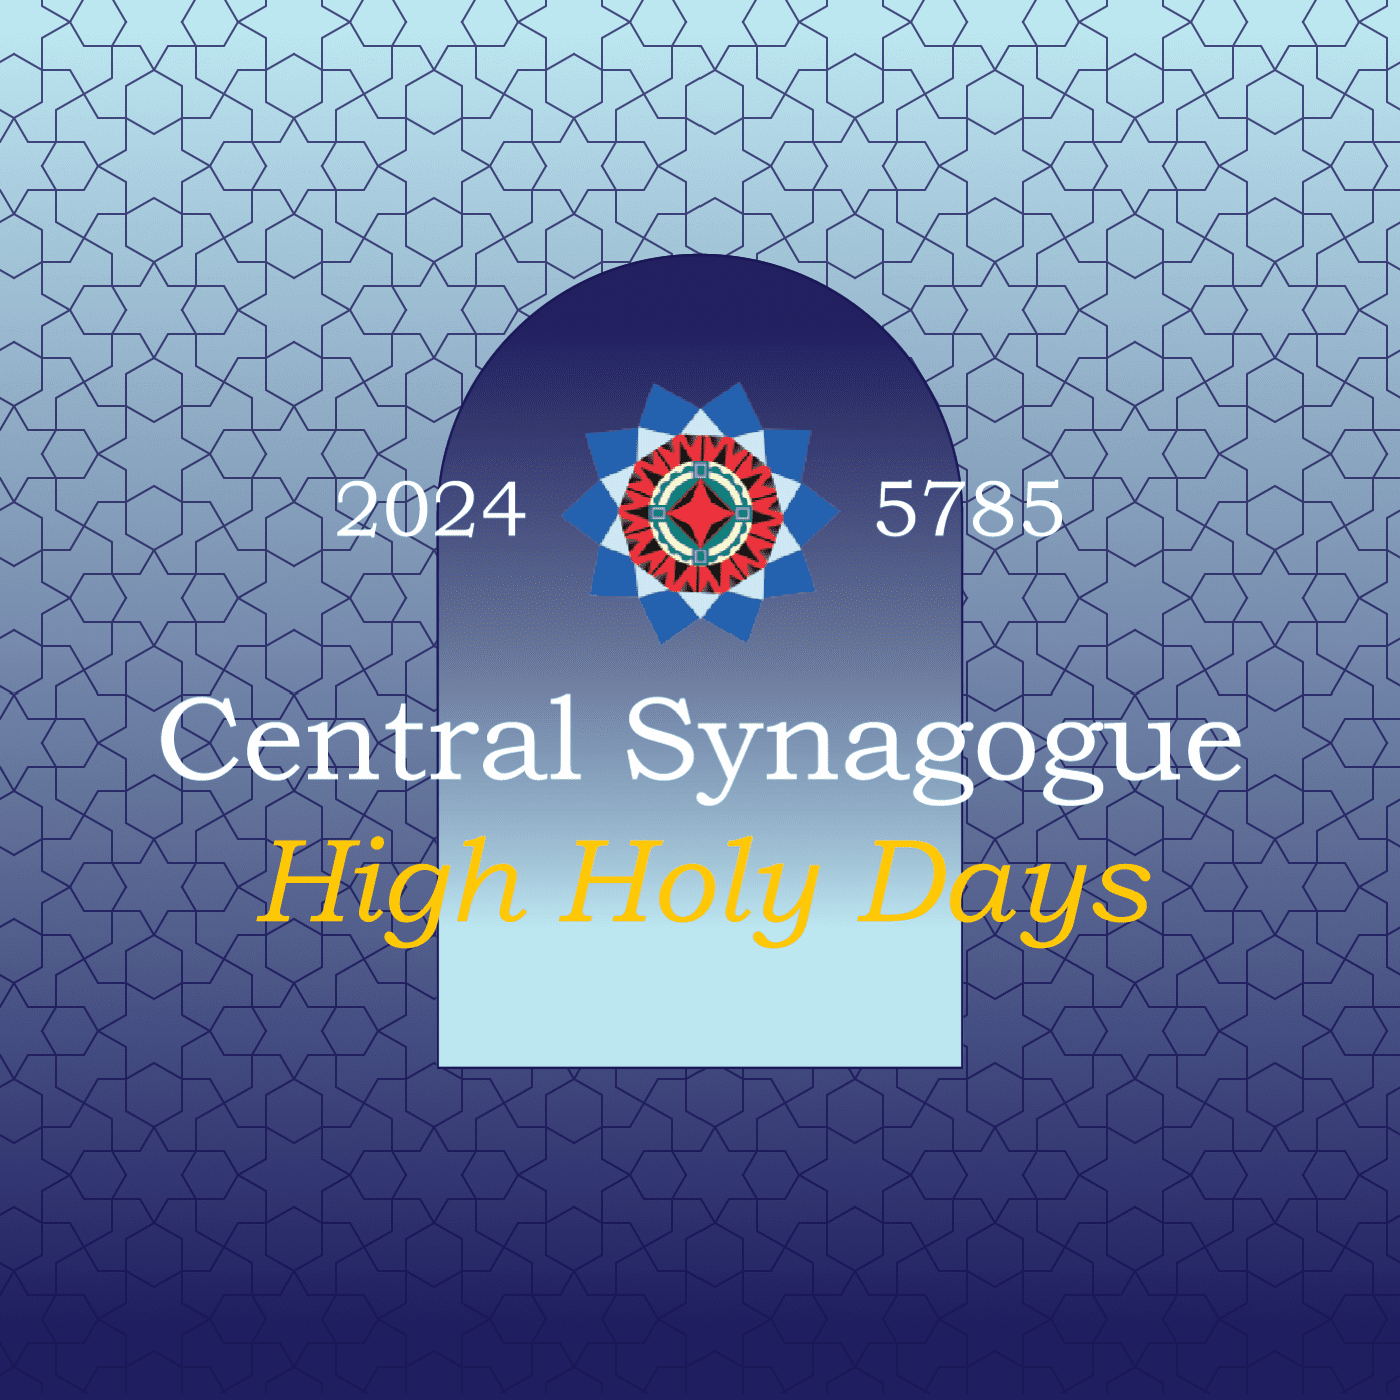 Central Synagogue High Holy Days 2024